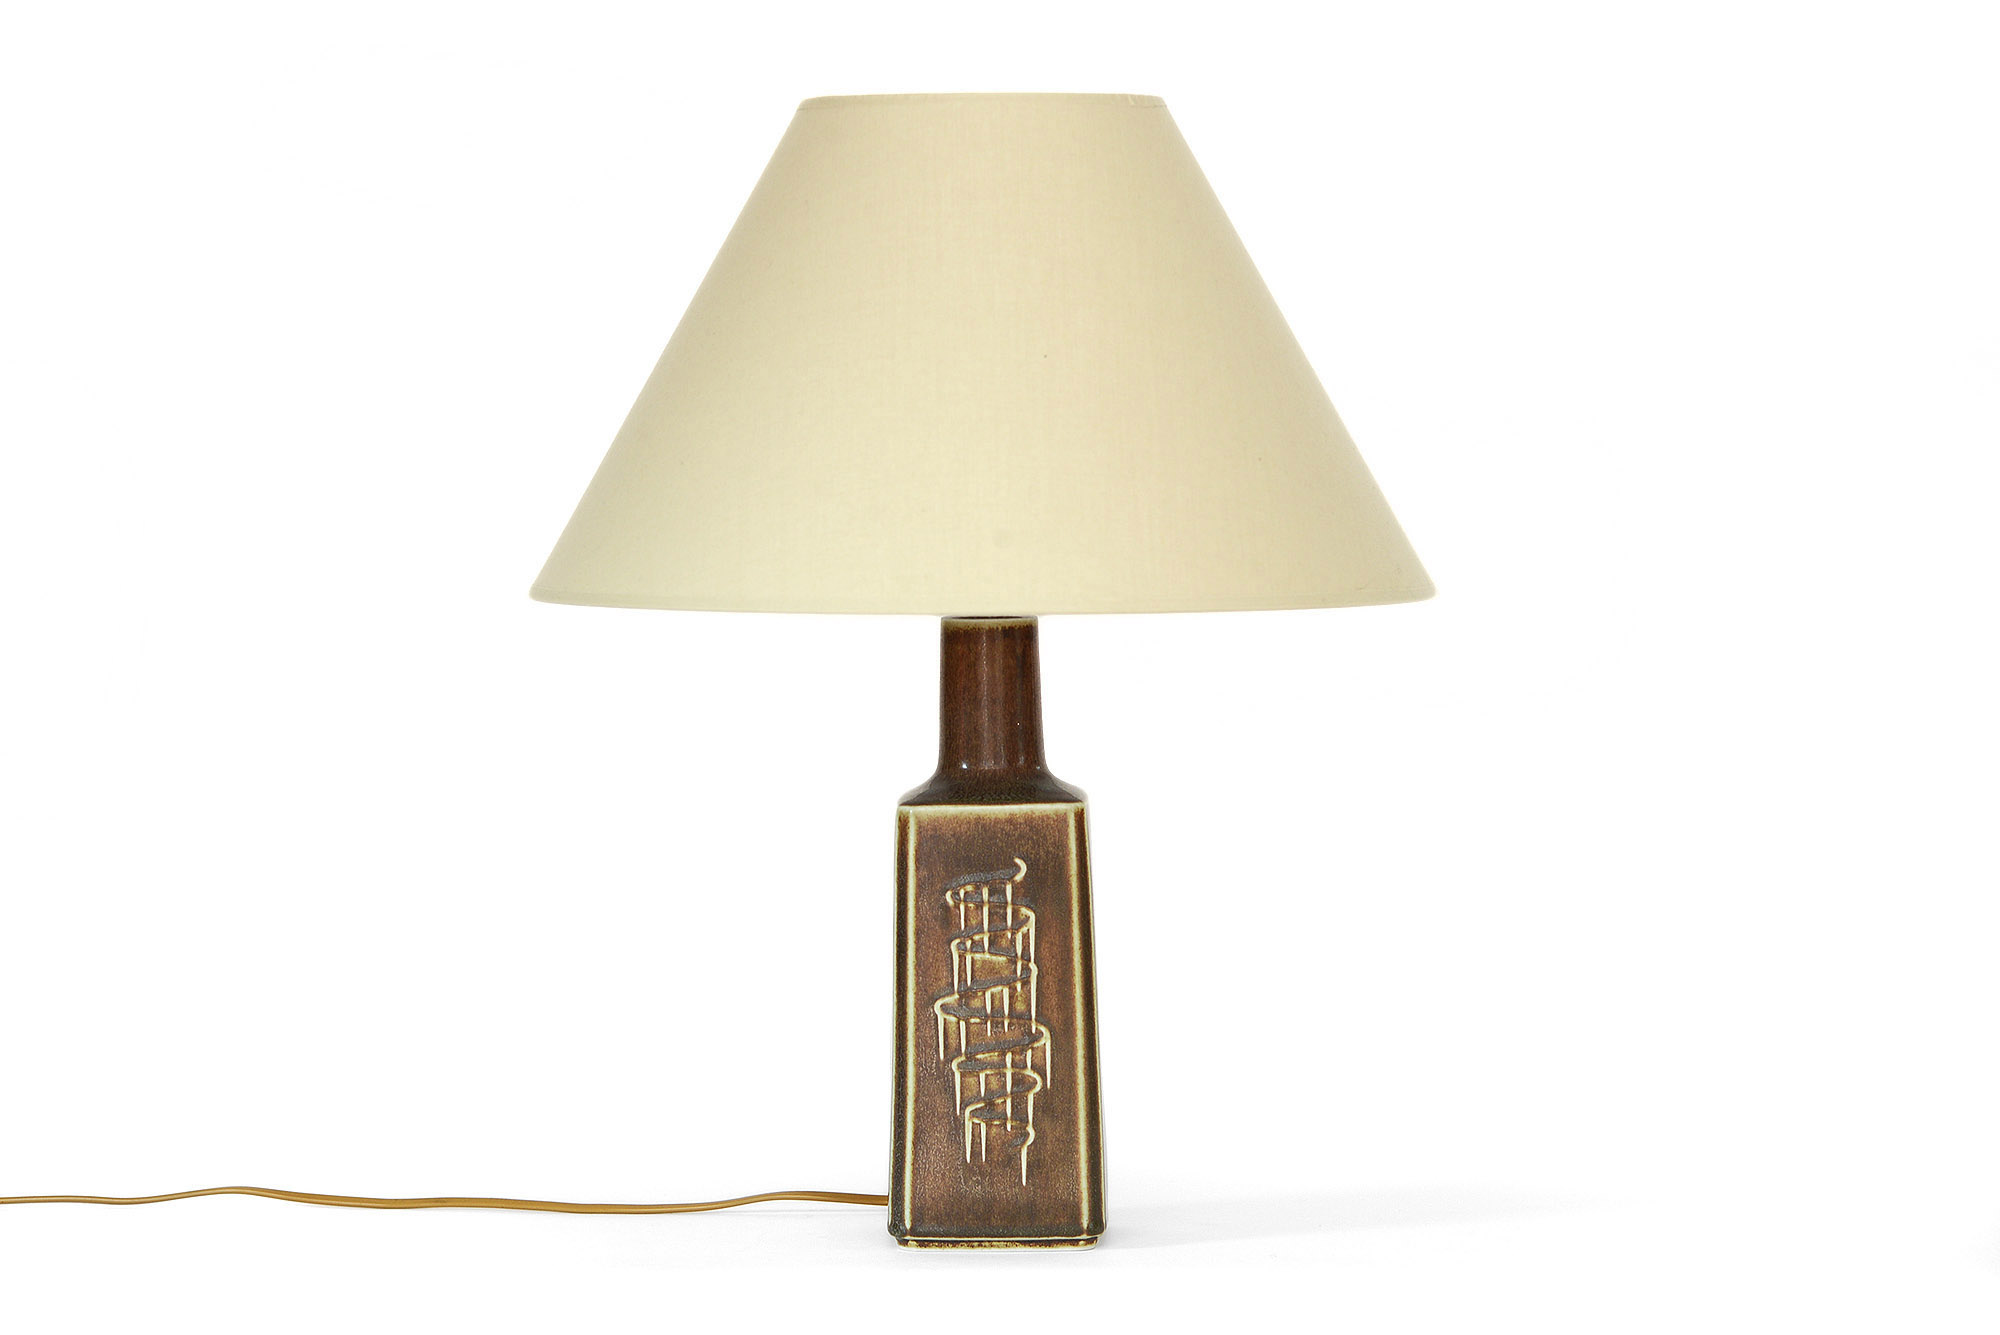 Stoneware Table Lamp From Désirée, Stoneware Table Lamp